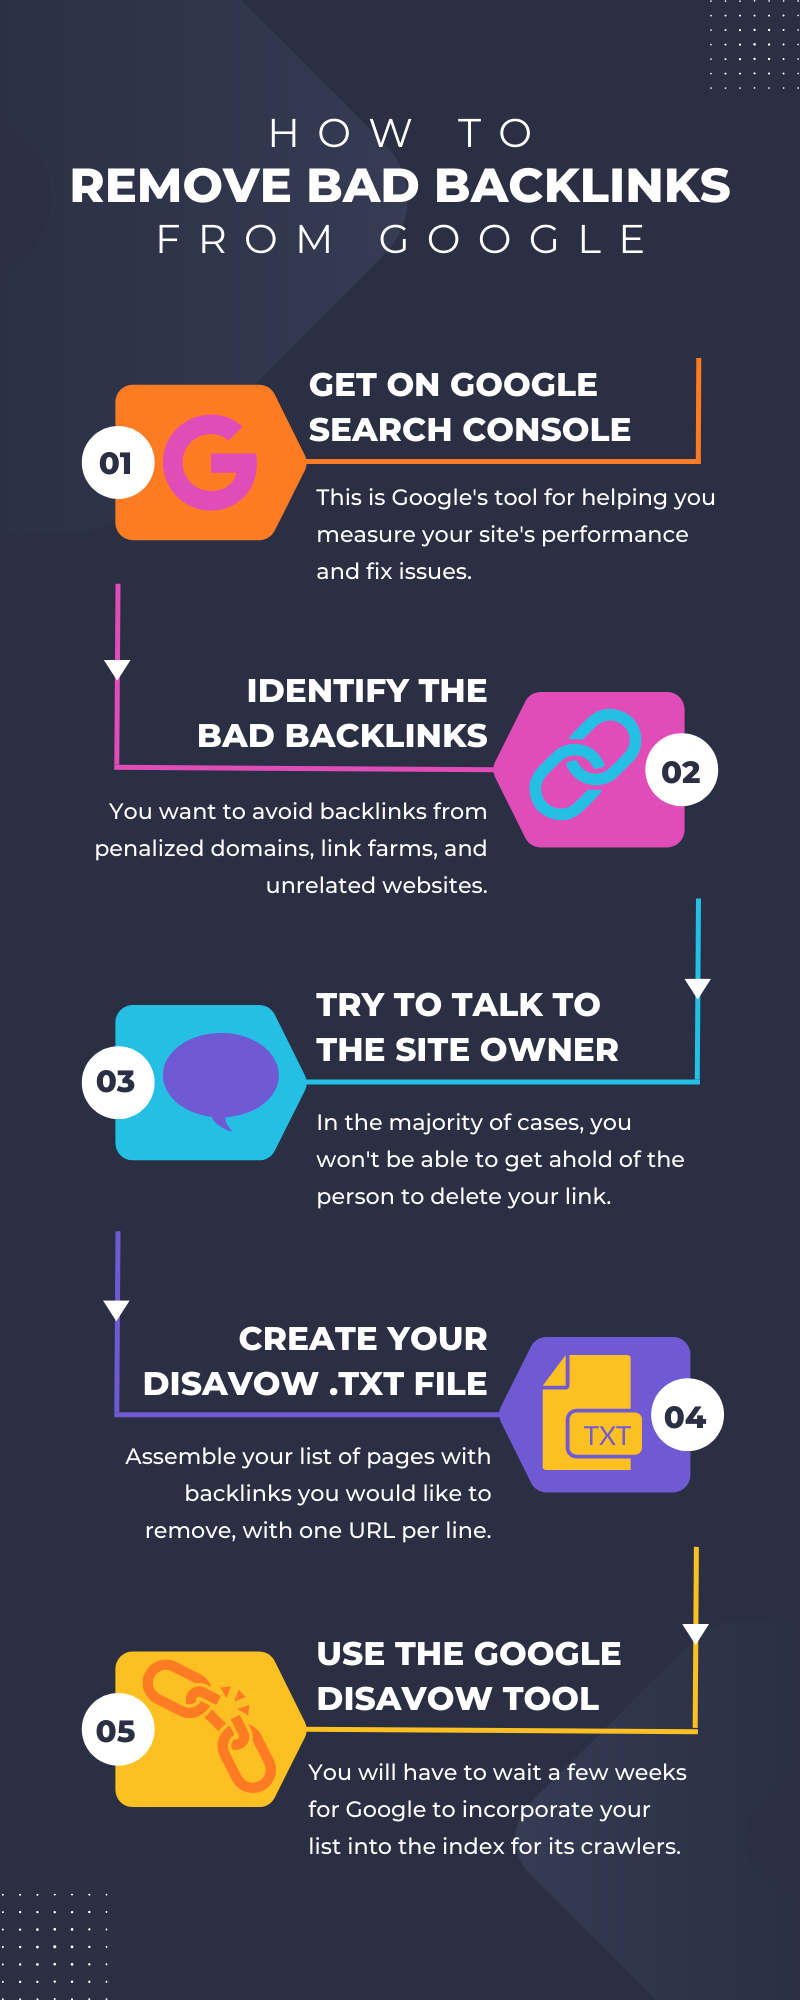 How to Remove Bad Backlinks from Google